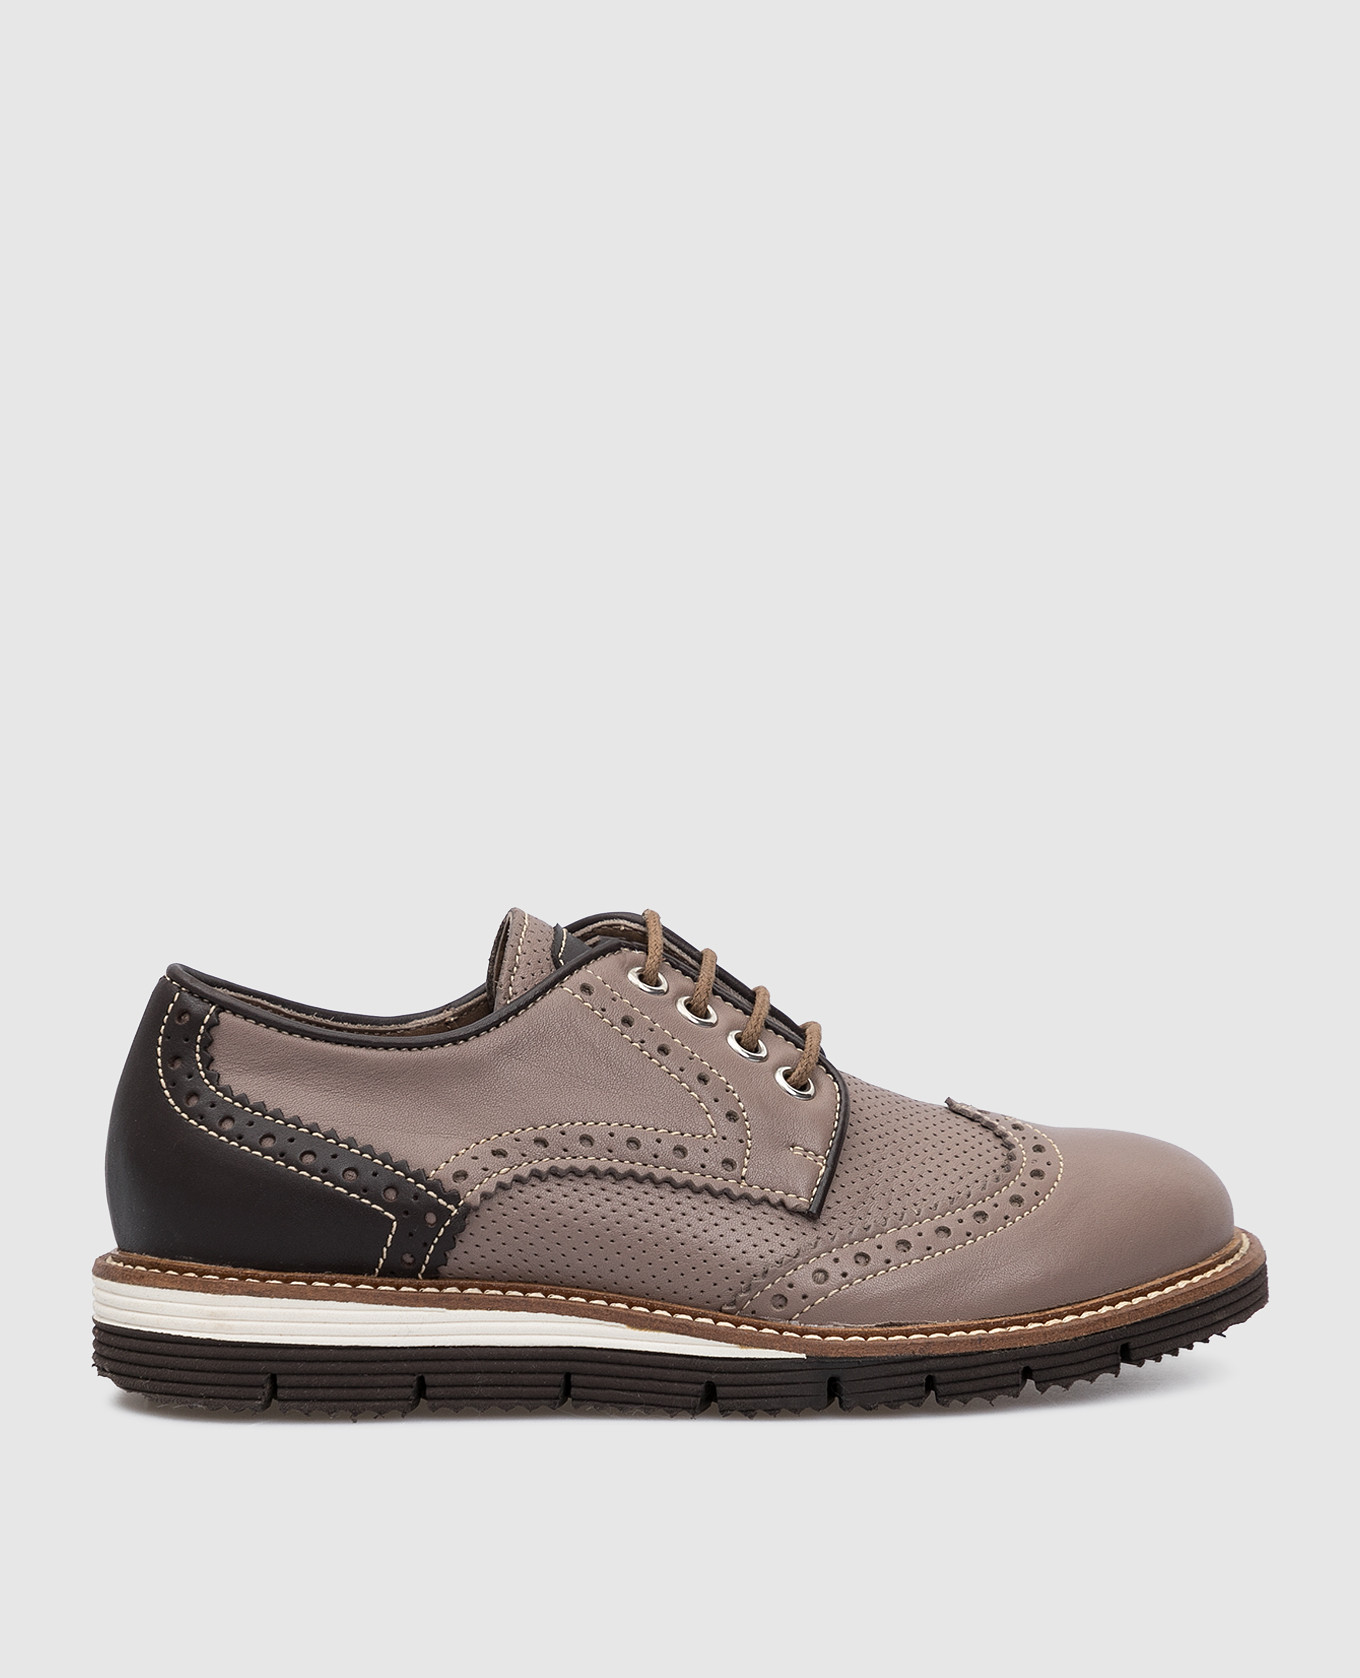 Children's leather brogues with emblem